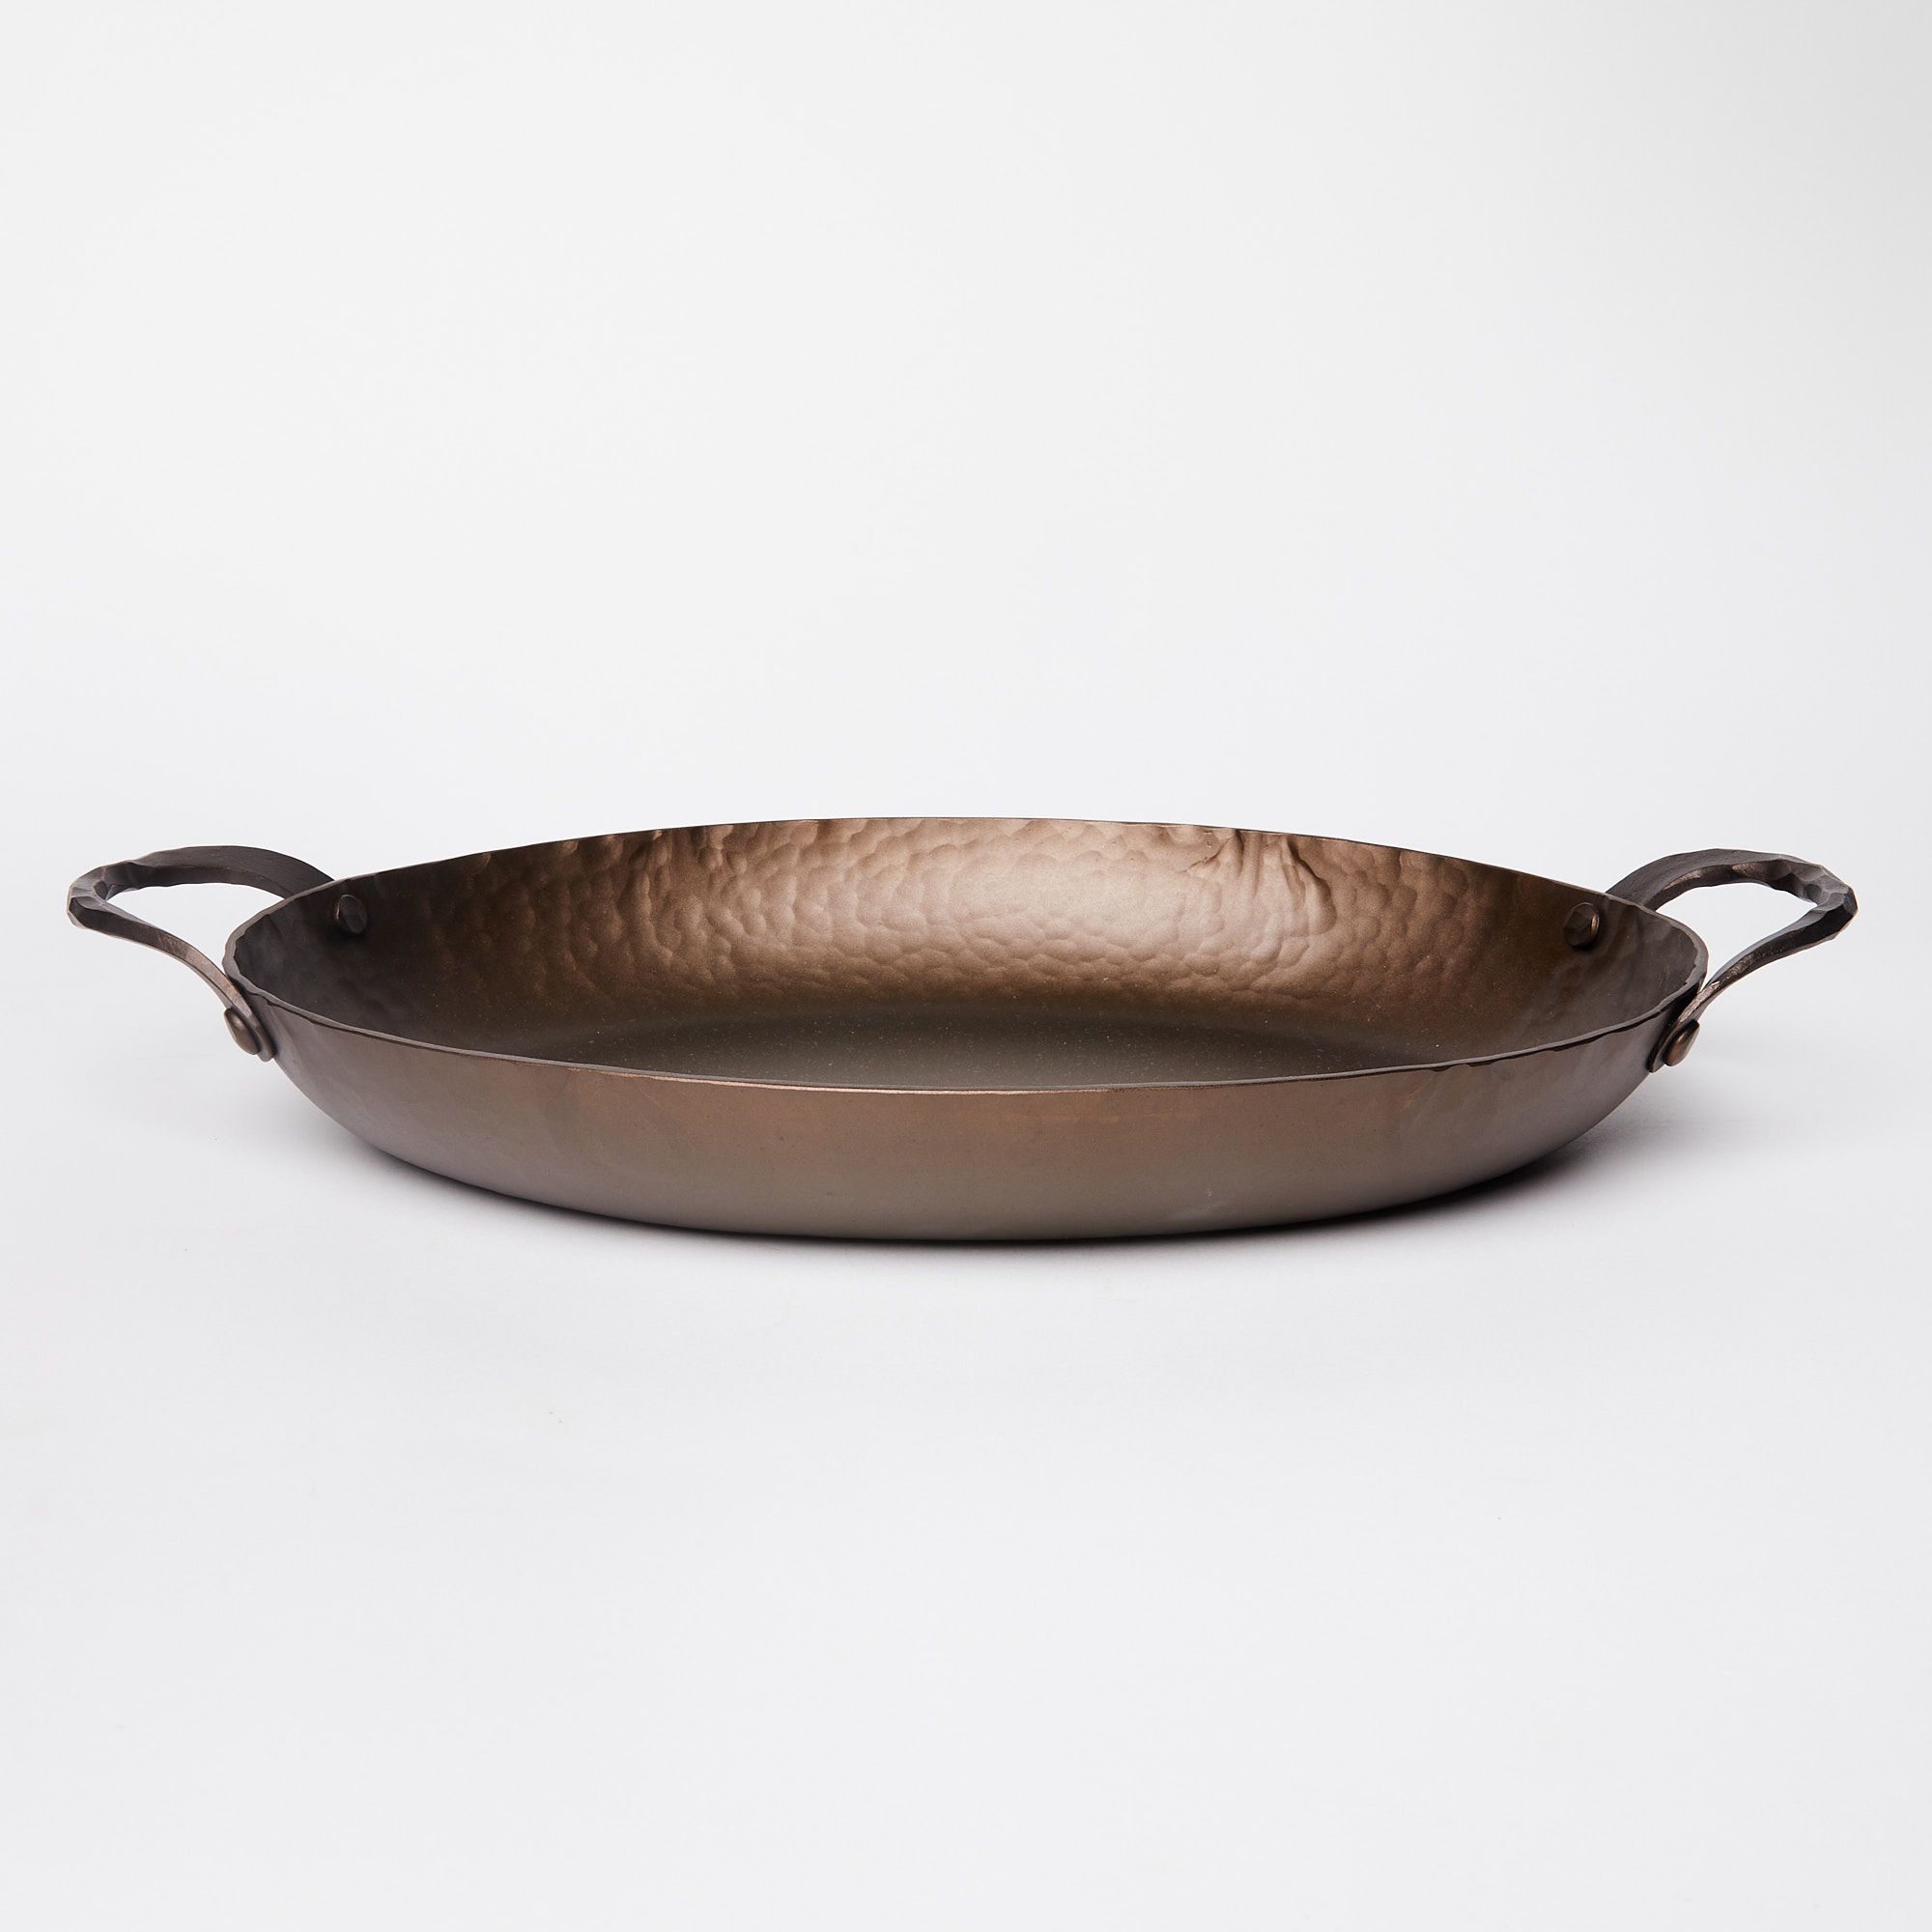 A hammered metal oval roasting pan with handles on both sides